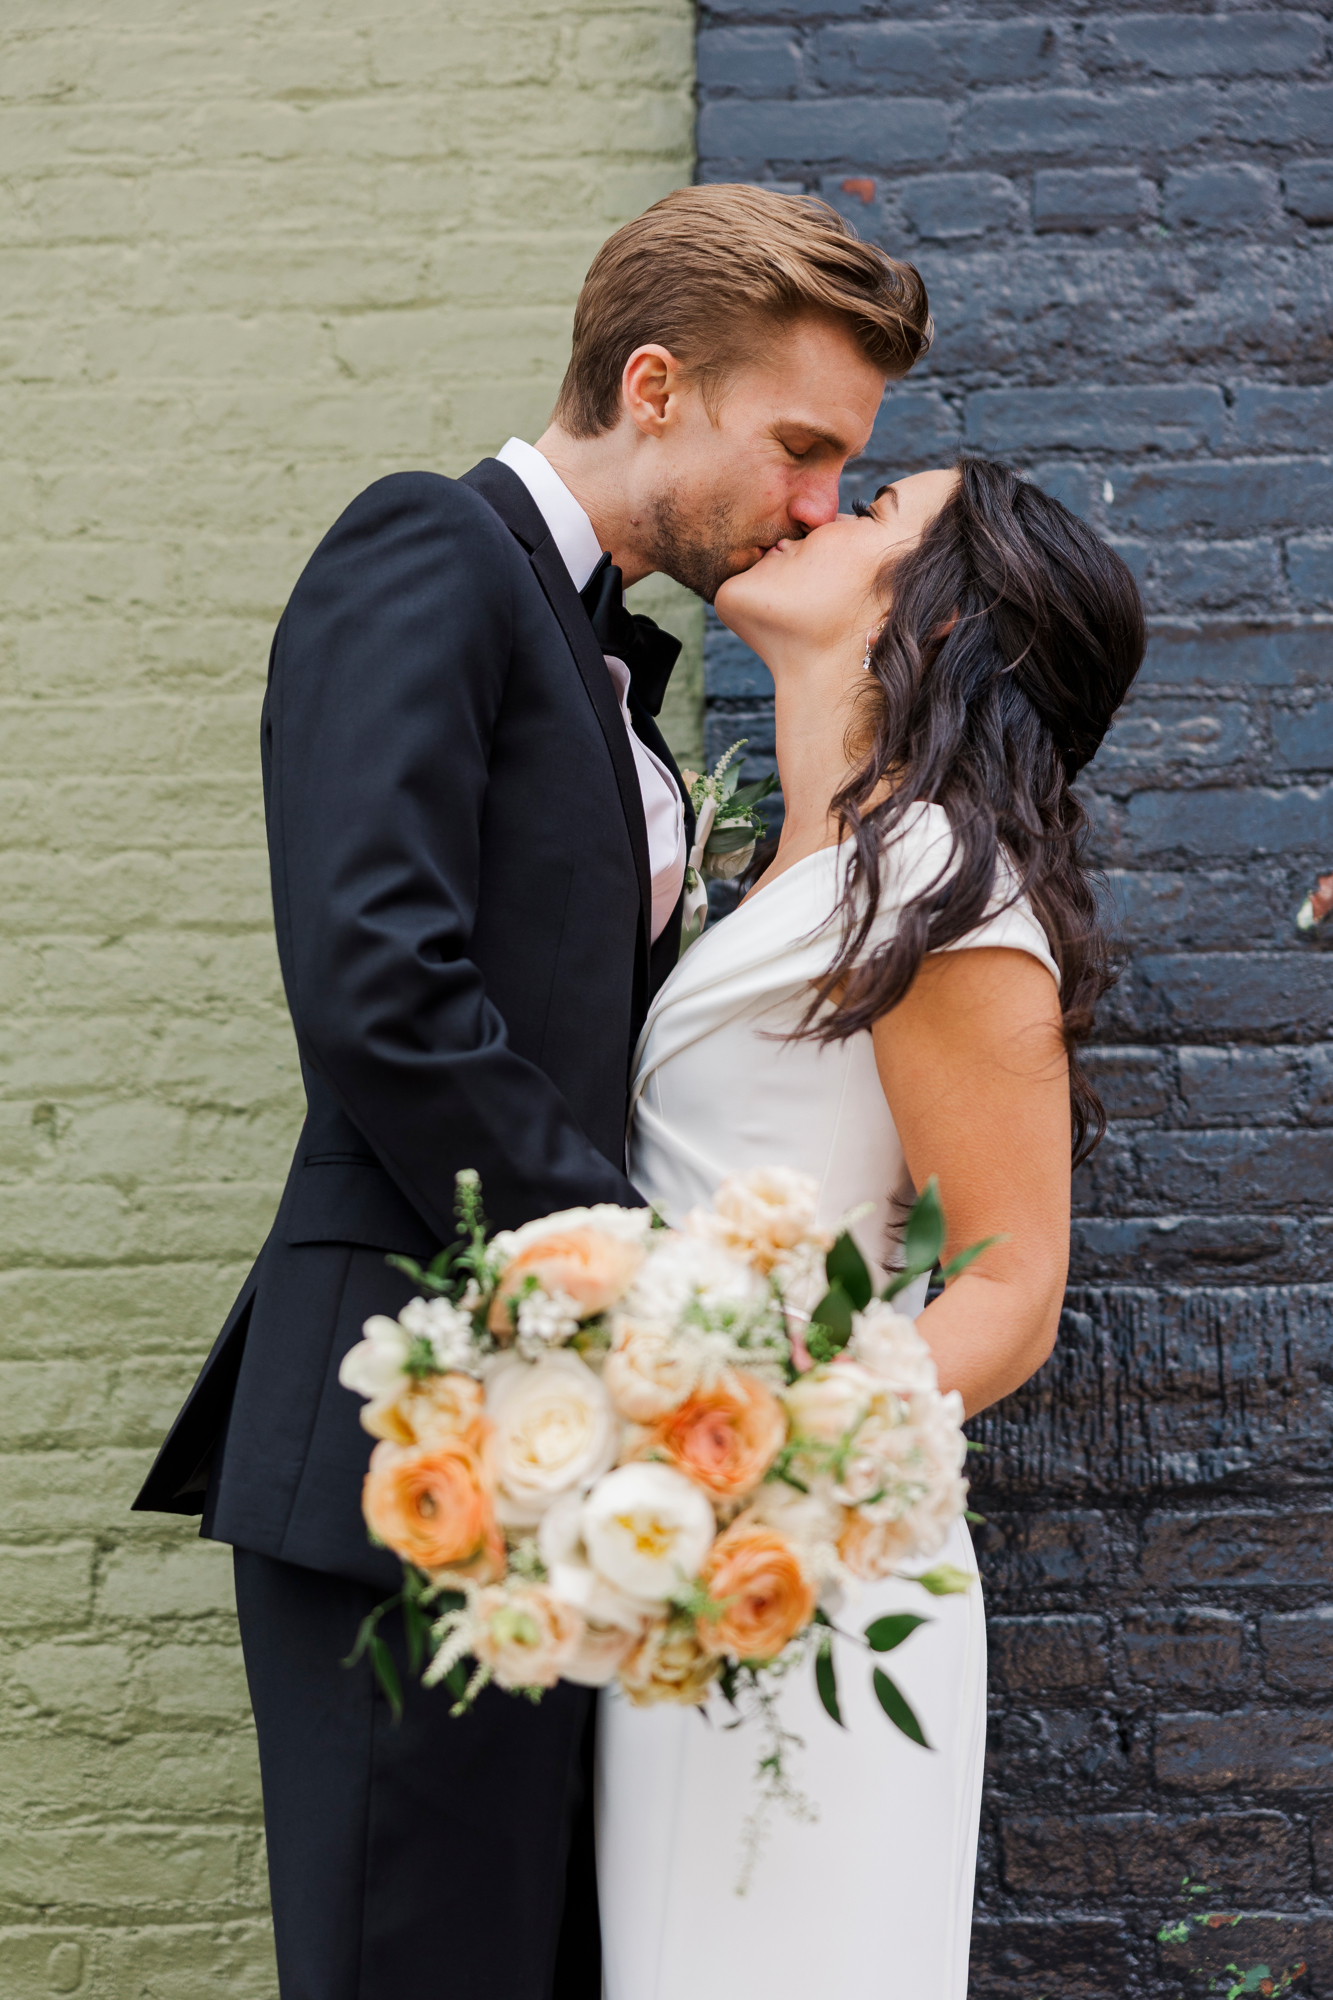 Whimsical Wedding at 501 Union in NYC